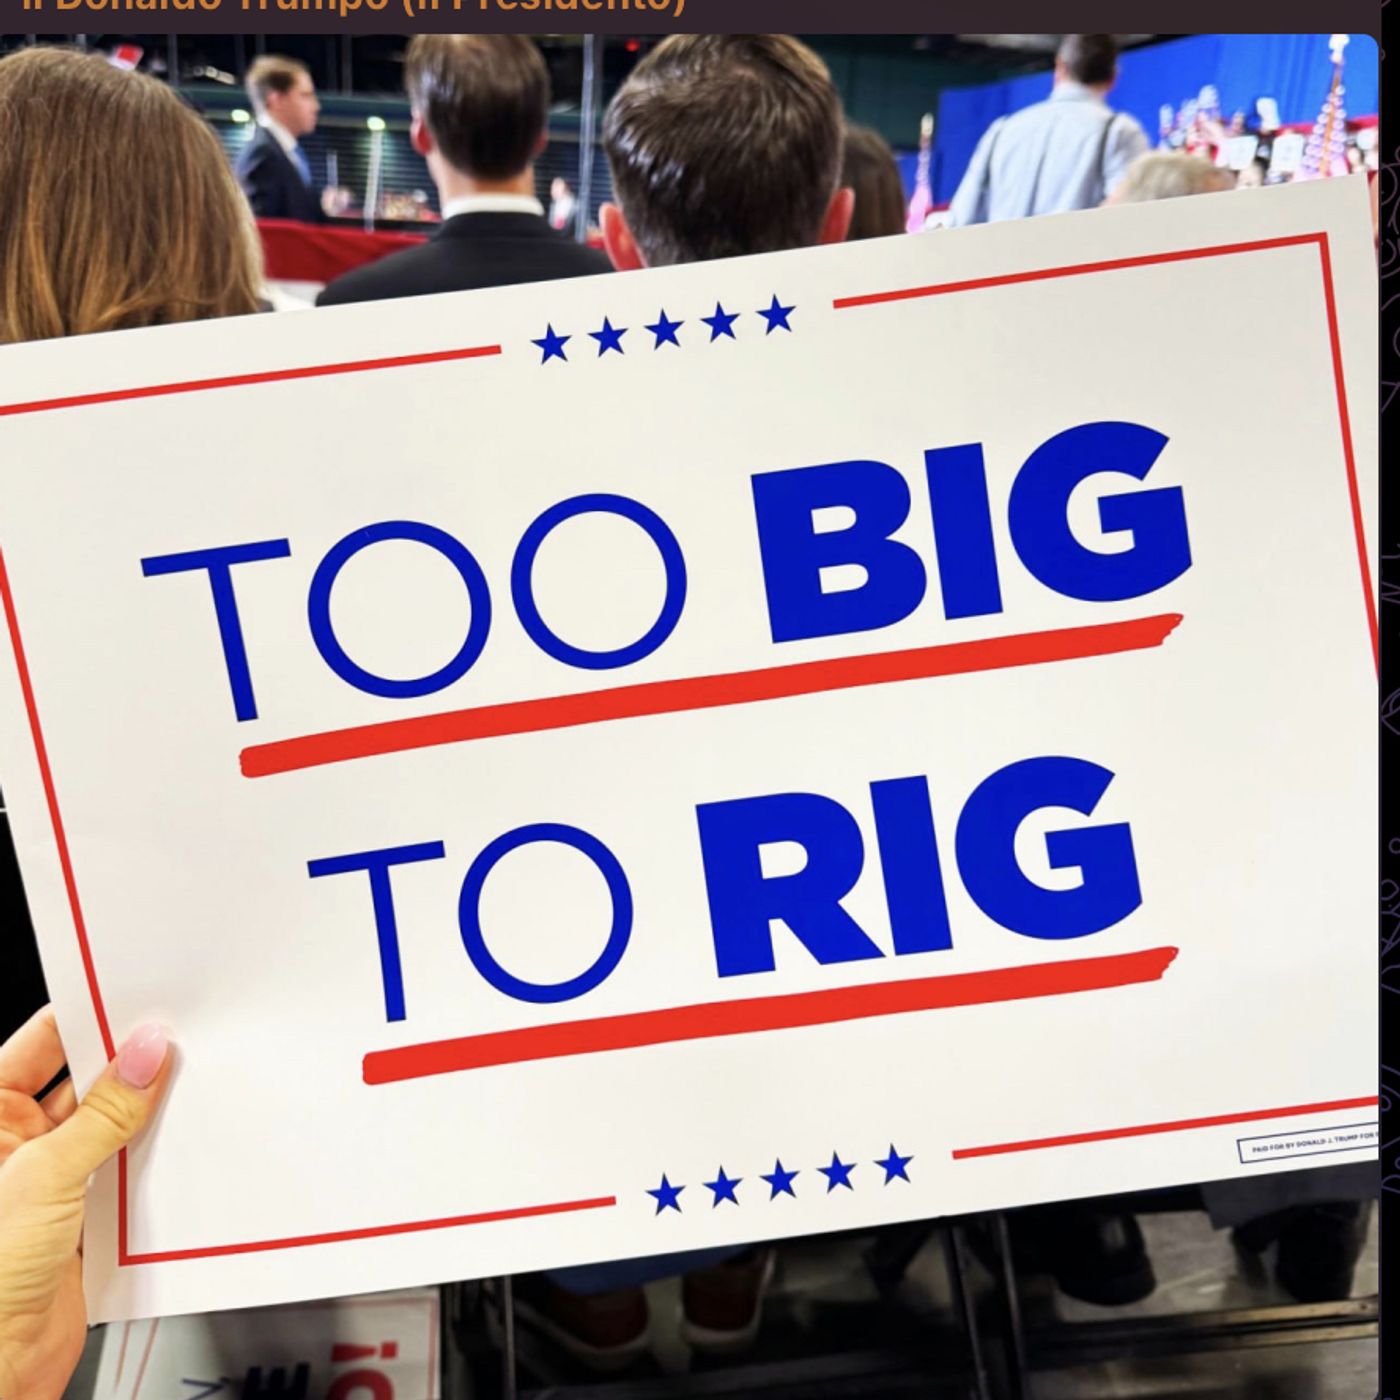 Americano: Will Trump’s election be ’too big to rig’?